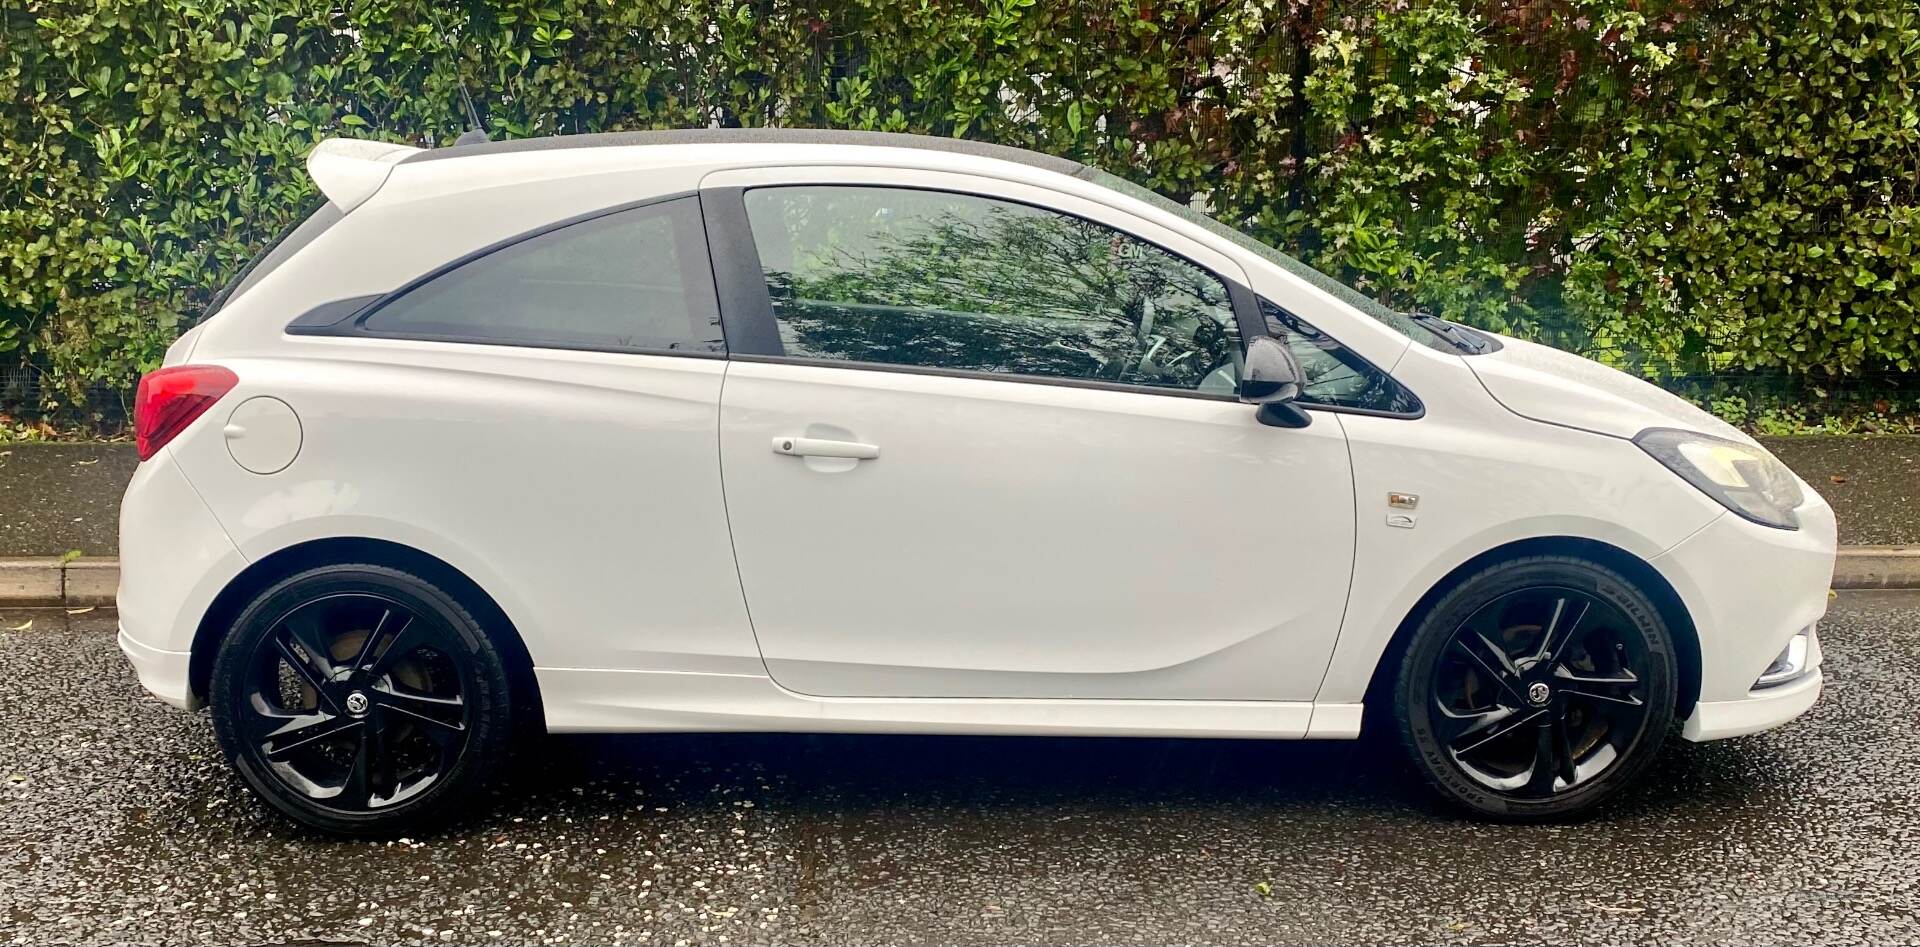 Vauxhall Corsa HATCHBACK SPECIAL EDS in Tyrone